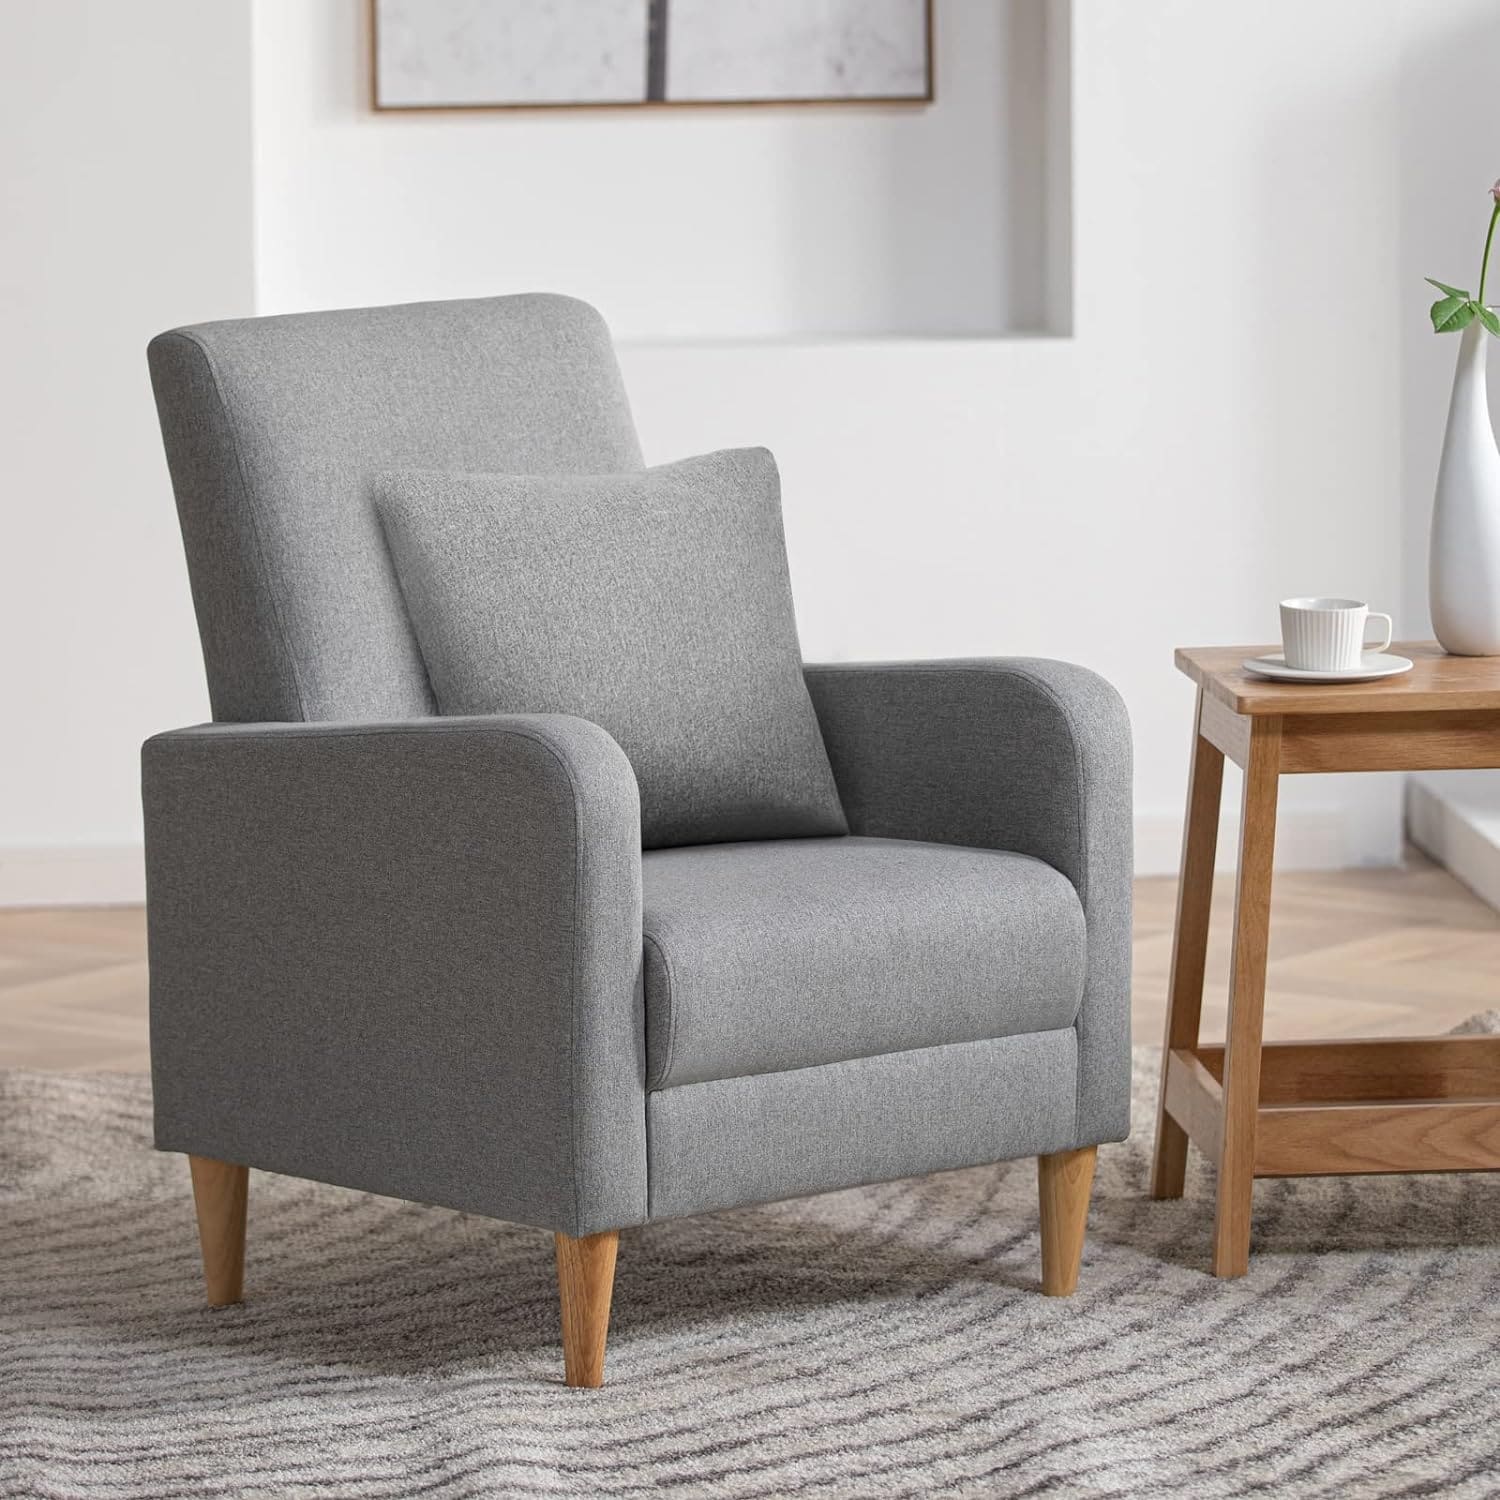 Fabric/Leather Modern Accent Chairs with Lounge Seat